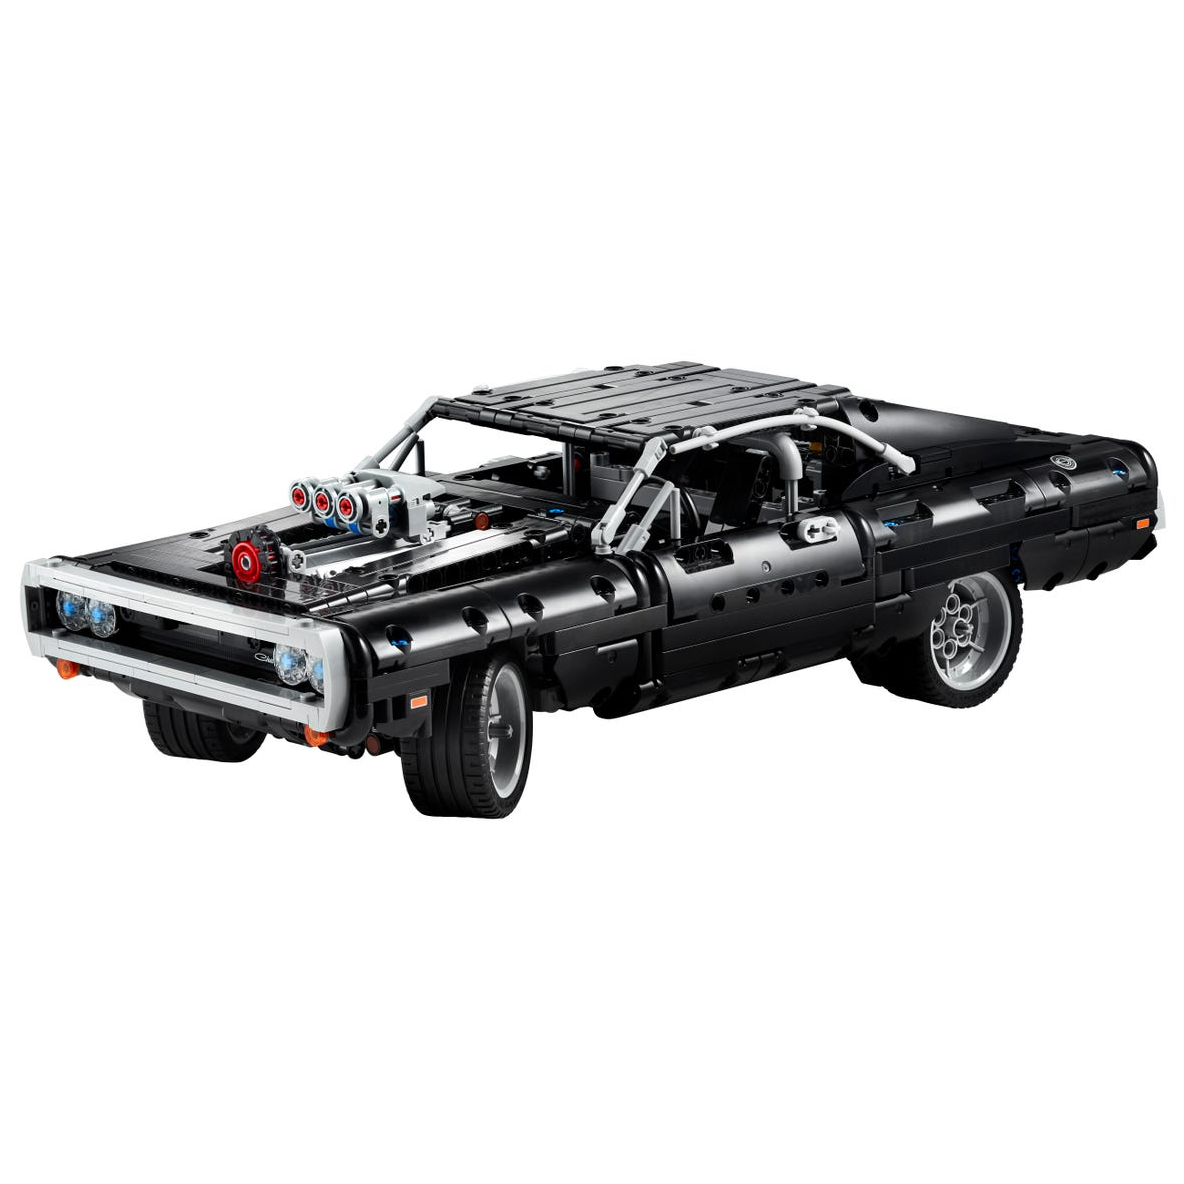 42111 Technic Doms Dodge Charger